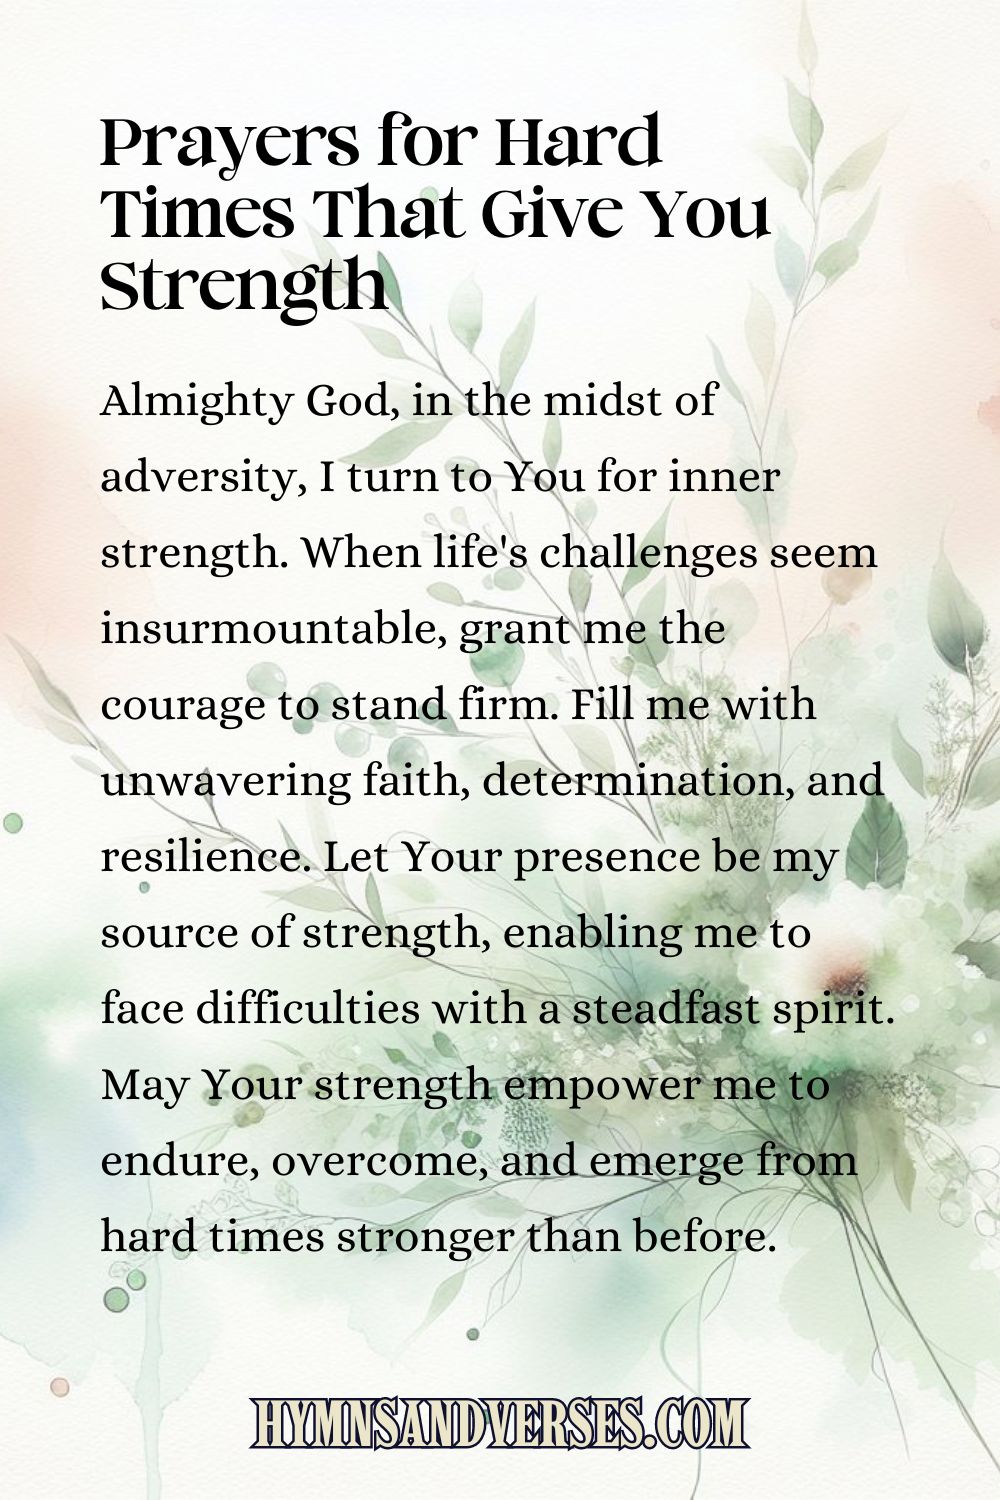 Pin sized image for Prayers for Hard Times That Give You Strength, reads: Almighty God, in the midst of adversity, I turn to You for inner strength. When life's challenges seem insurmountable, grant me the courage to stand firm. Fill me with unwavering faith, determination, and resilience. Let Your presence be my source of strength, enabling me to face difficulties with a steadfast spirit. May Your strength empower me to endure, overcome, and emerge from hard times stronger than before.